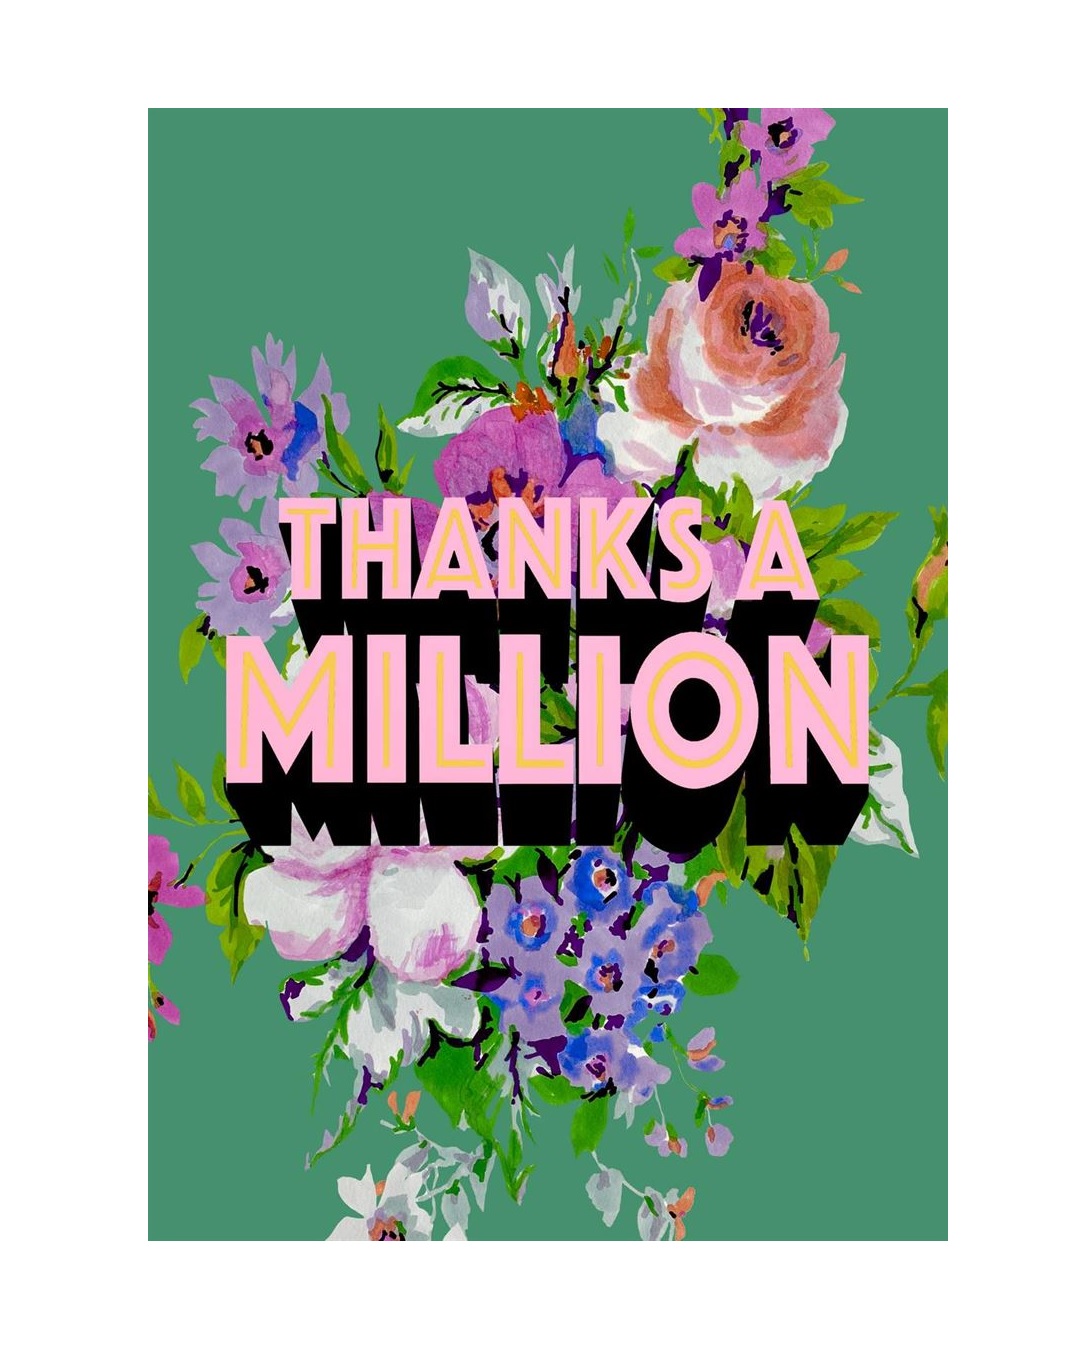 Thanks a million card with flowers and green background